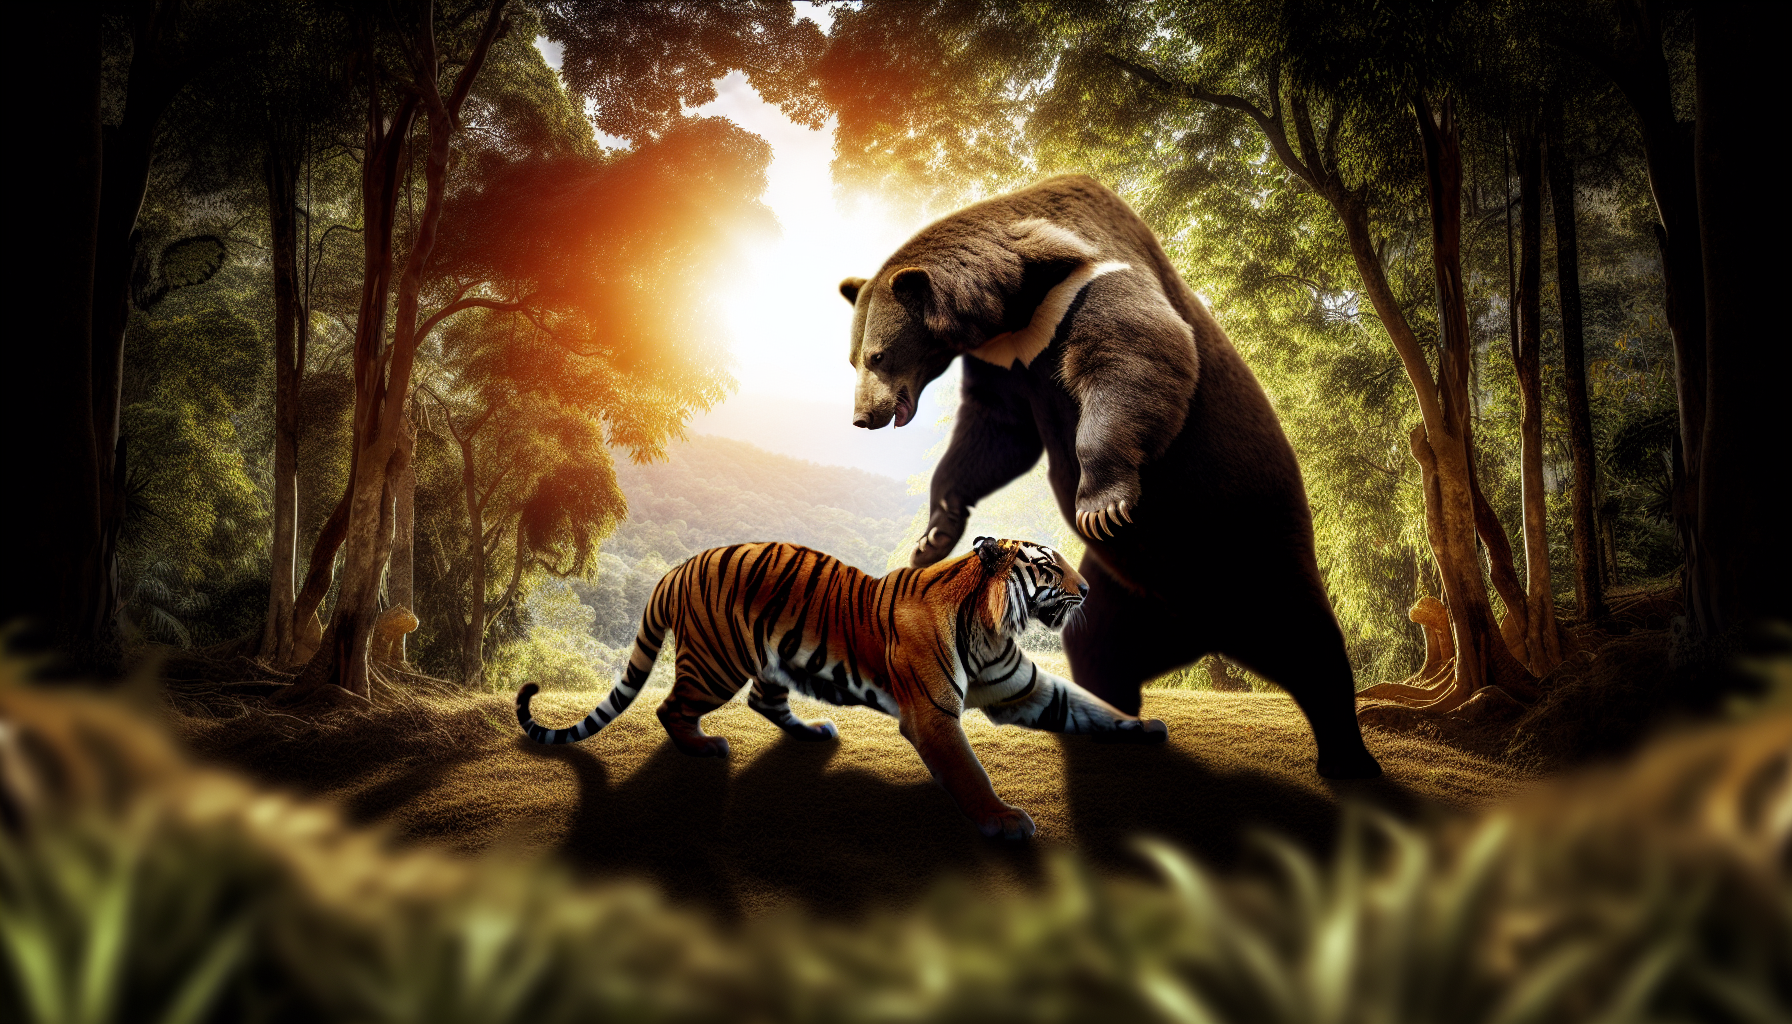 Captivating encounter of a tiger and sloth bear fight - an understated spectacle of survival instincts